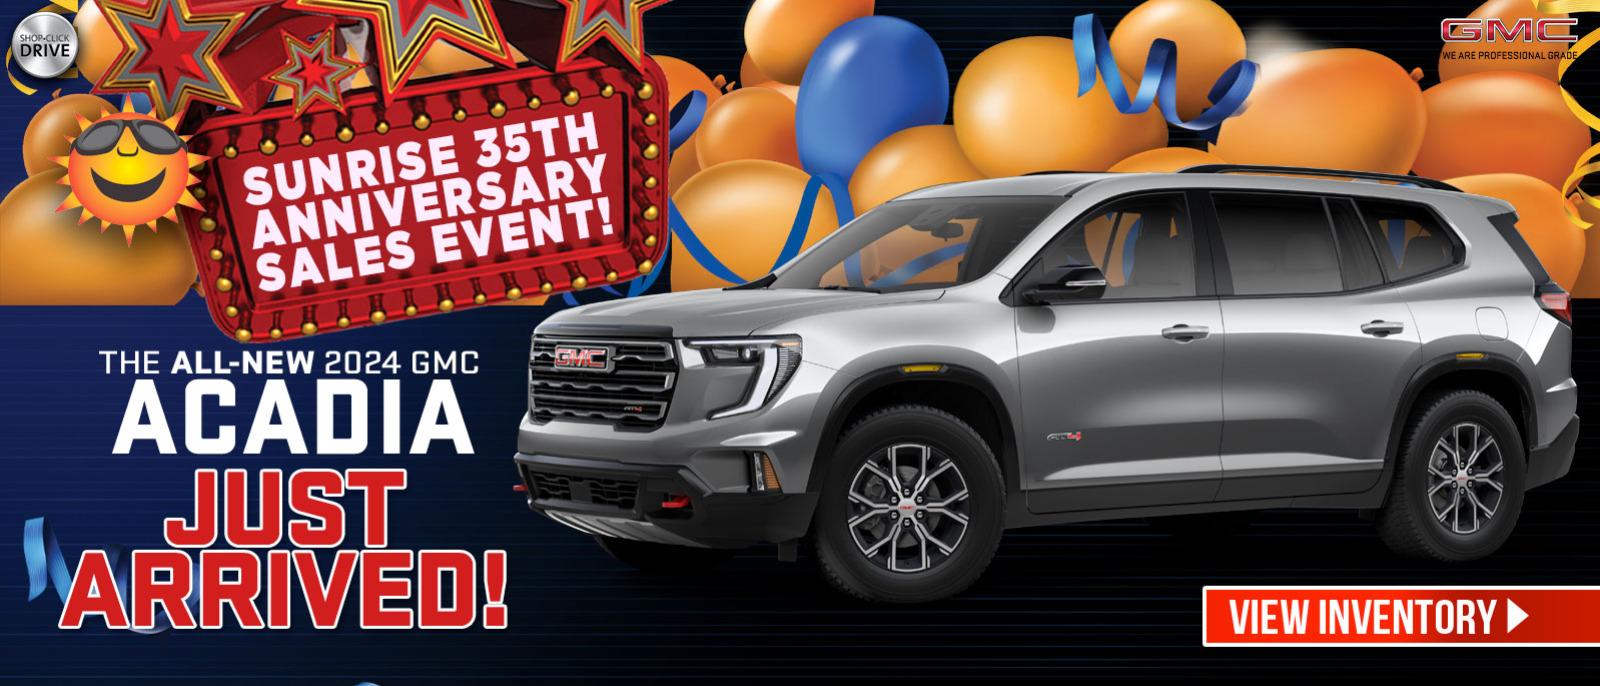 The All-New 2024 GMC Acadia Just Arrived!